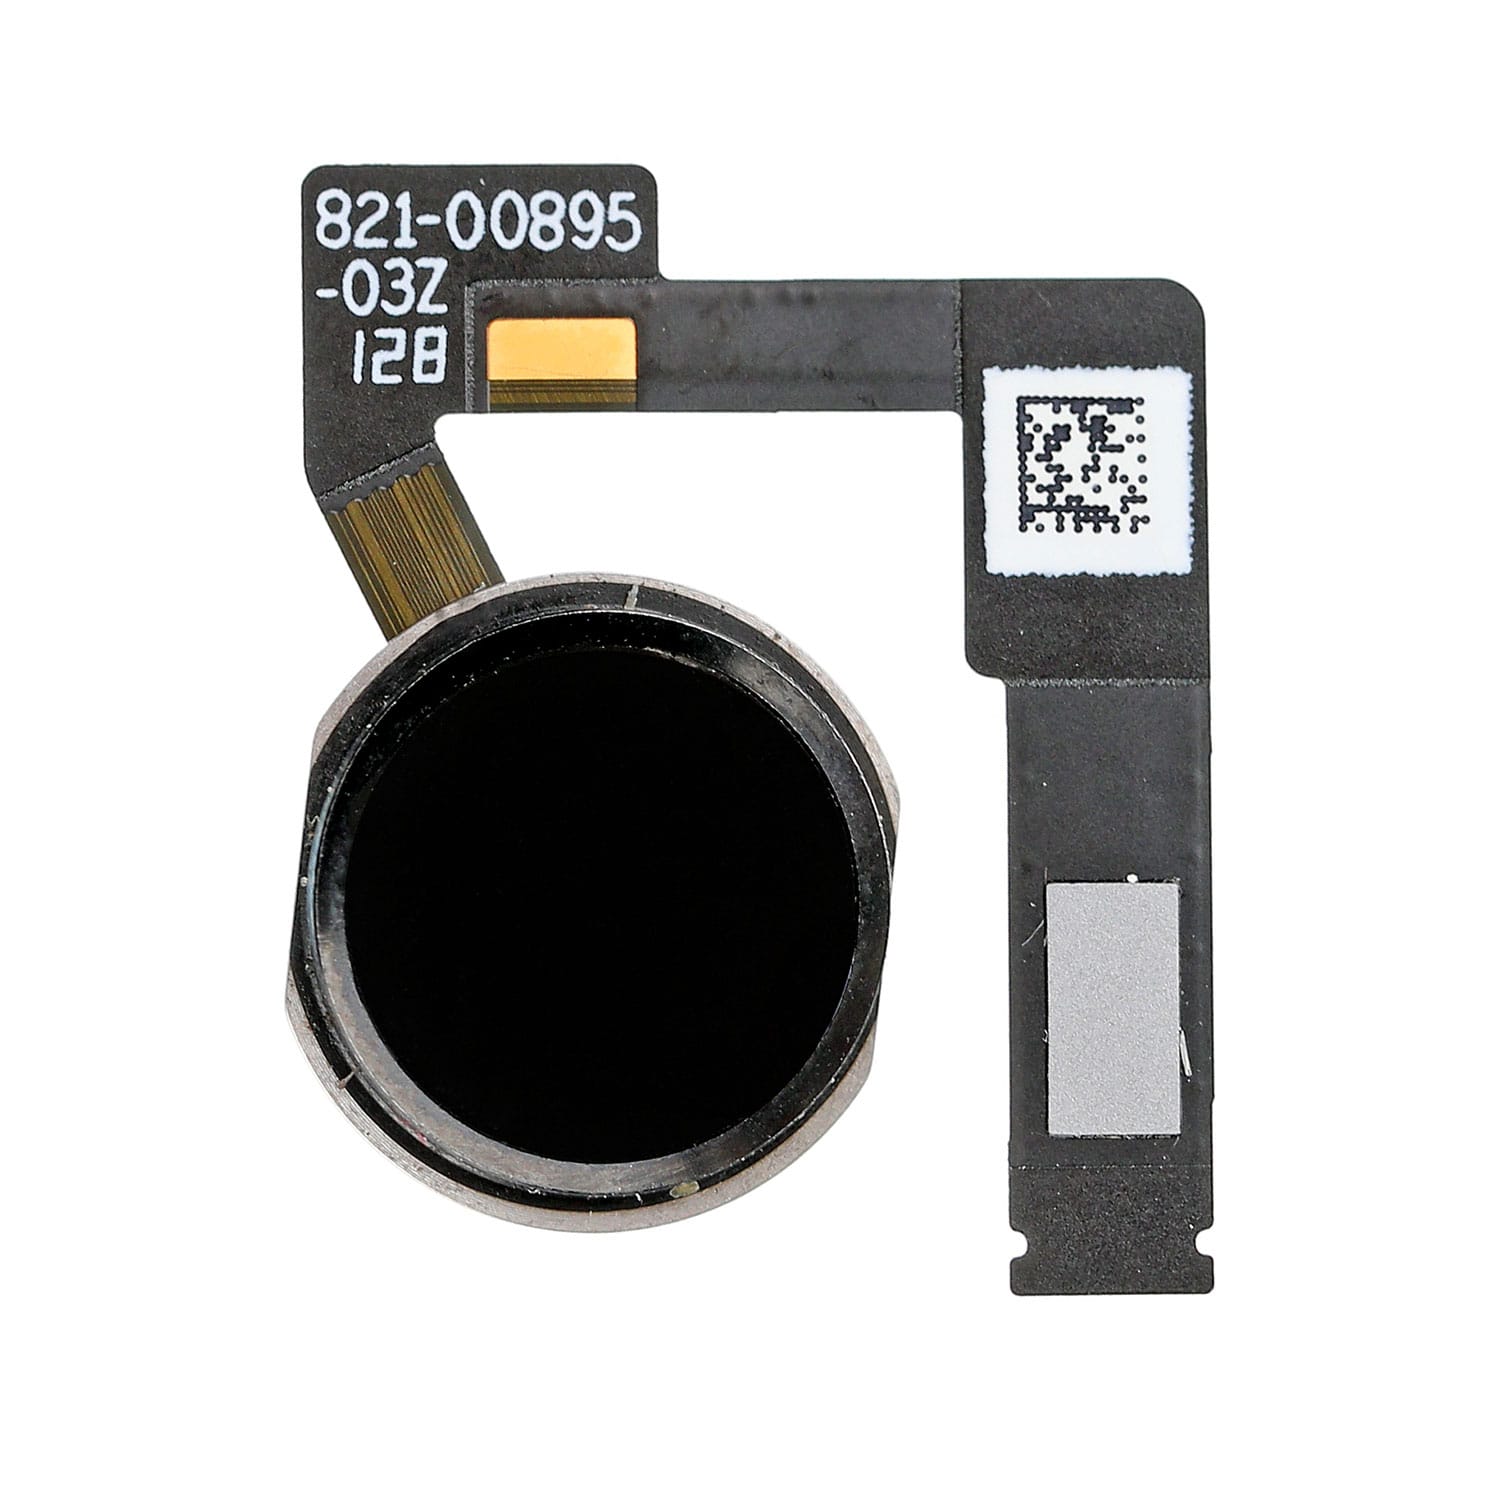 HOME BUTTON ASSEMBLY WITH FLEX CABLE RIBBON FOR IPAD AIR 3/ PRO 10.5" 1ST/12.9" 2ND GEN- BLACK